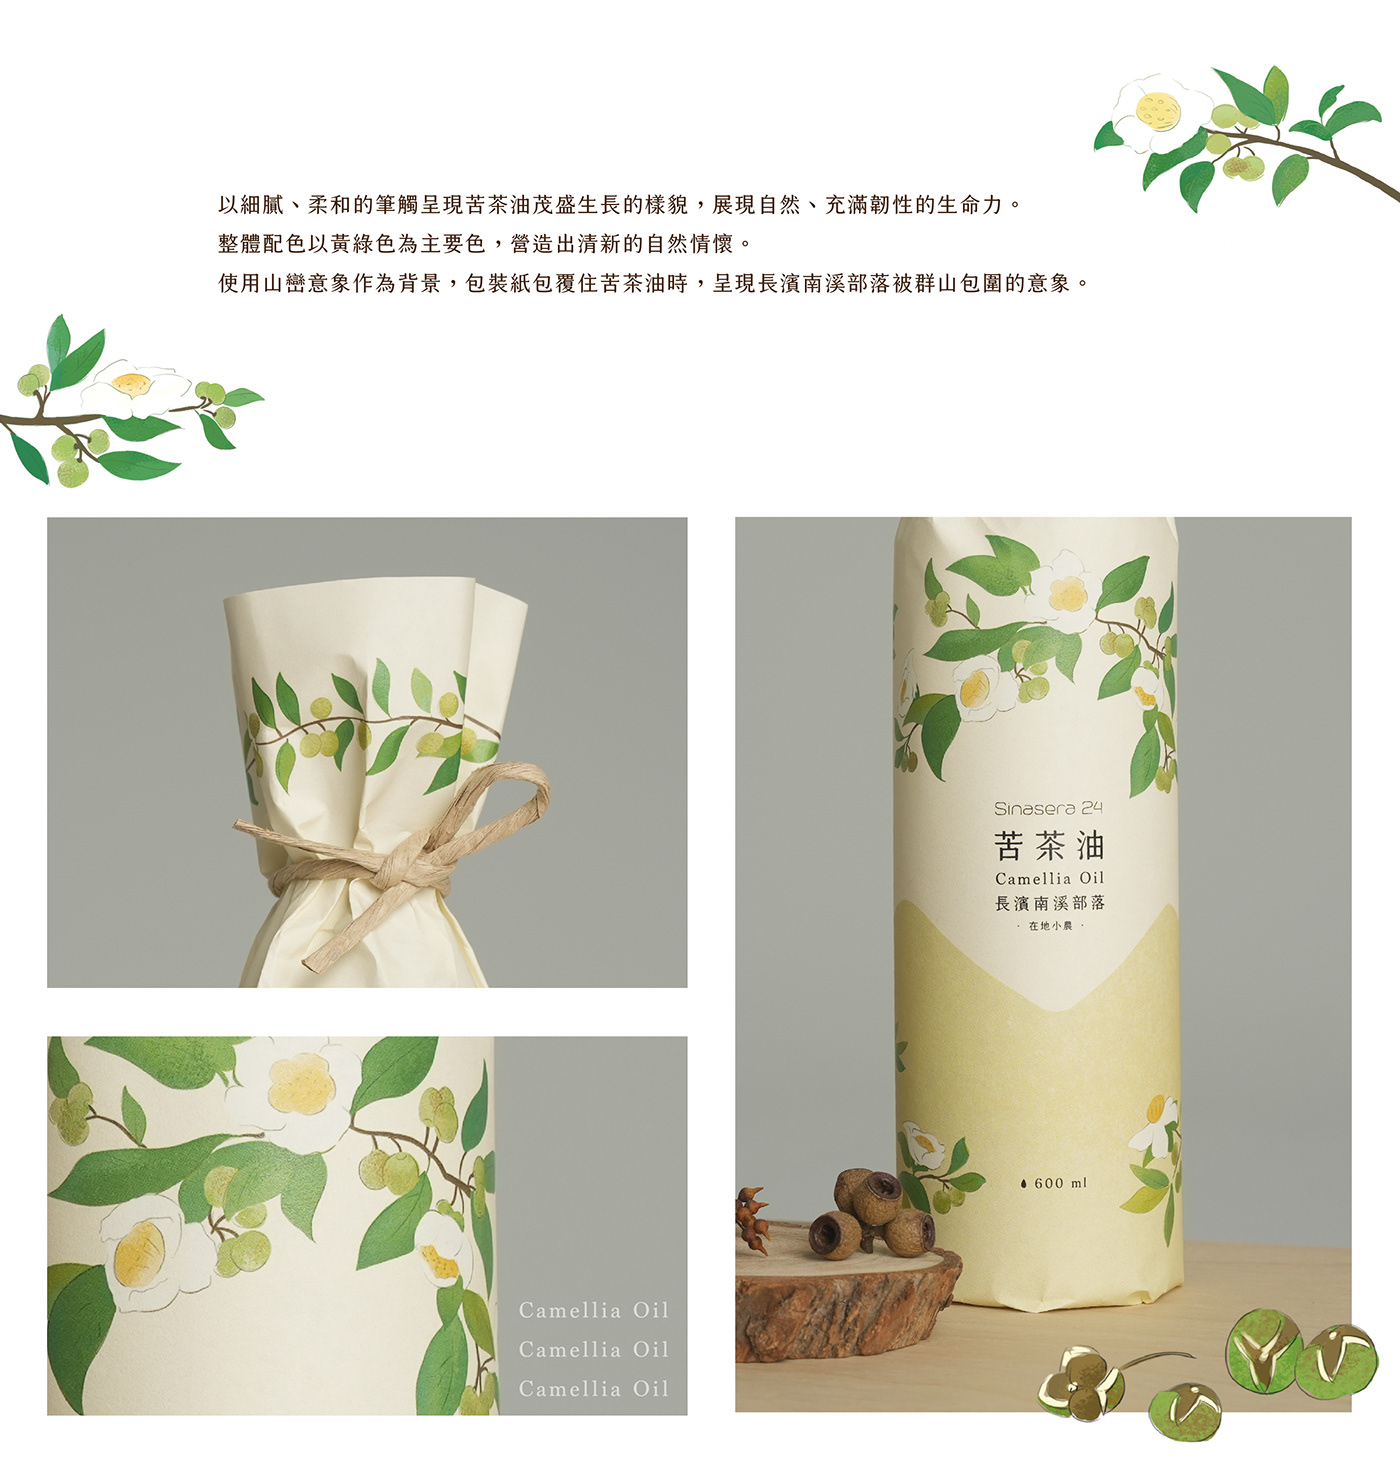 Camellia Oil Packging Photography  photoshoot product 包裝設計 商品攝影 情境照 手繪 插畫